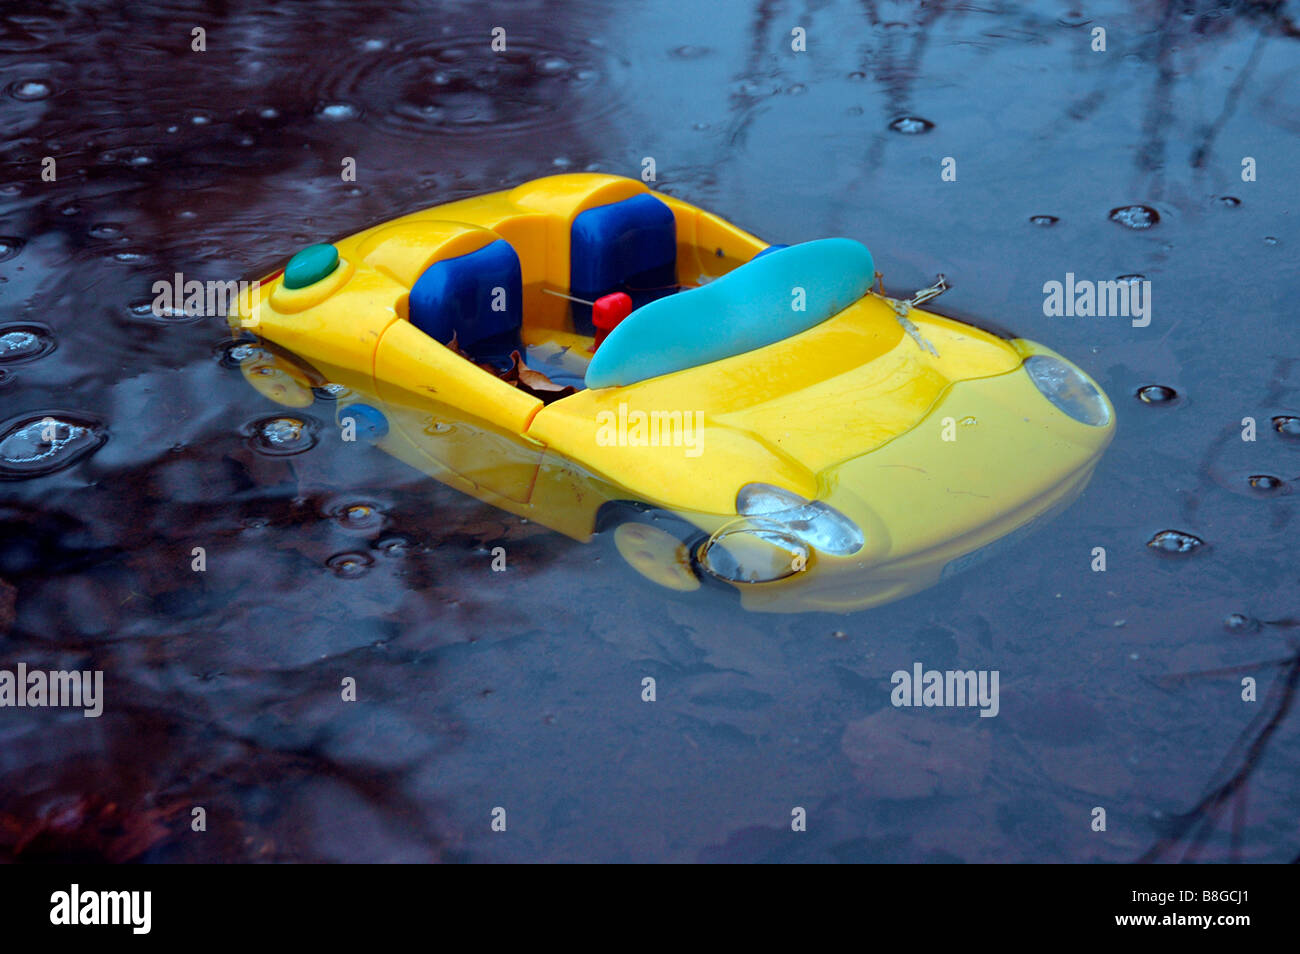 a toy sports car sinking in a puddle of water. Stock Photo